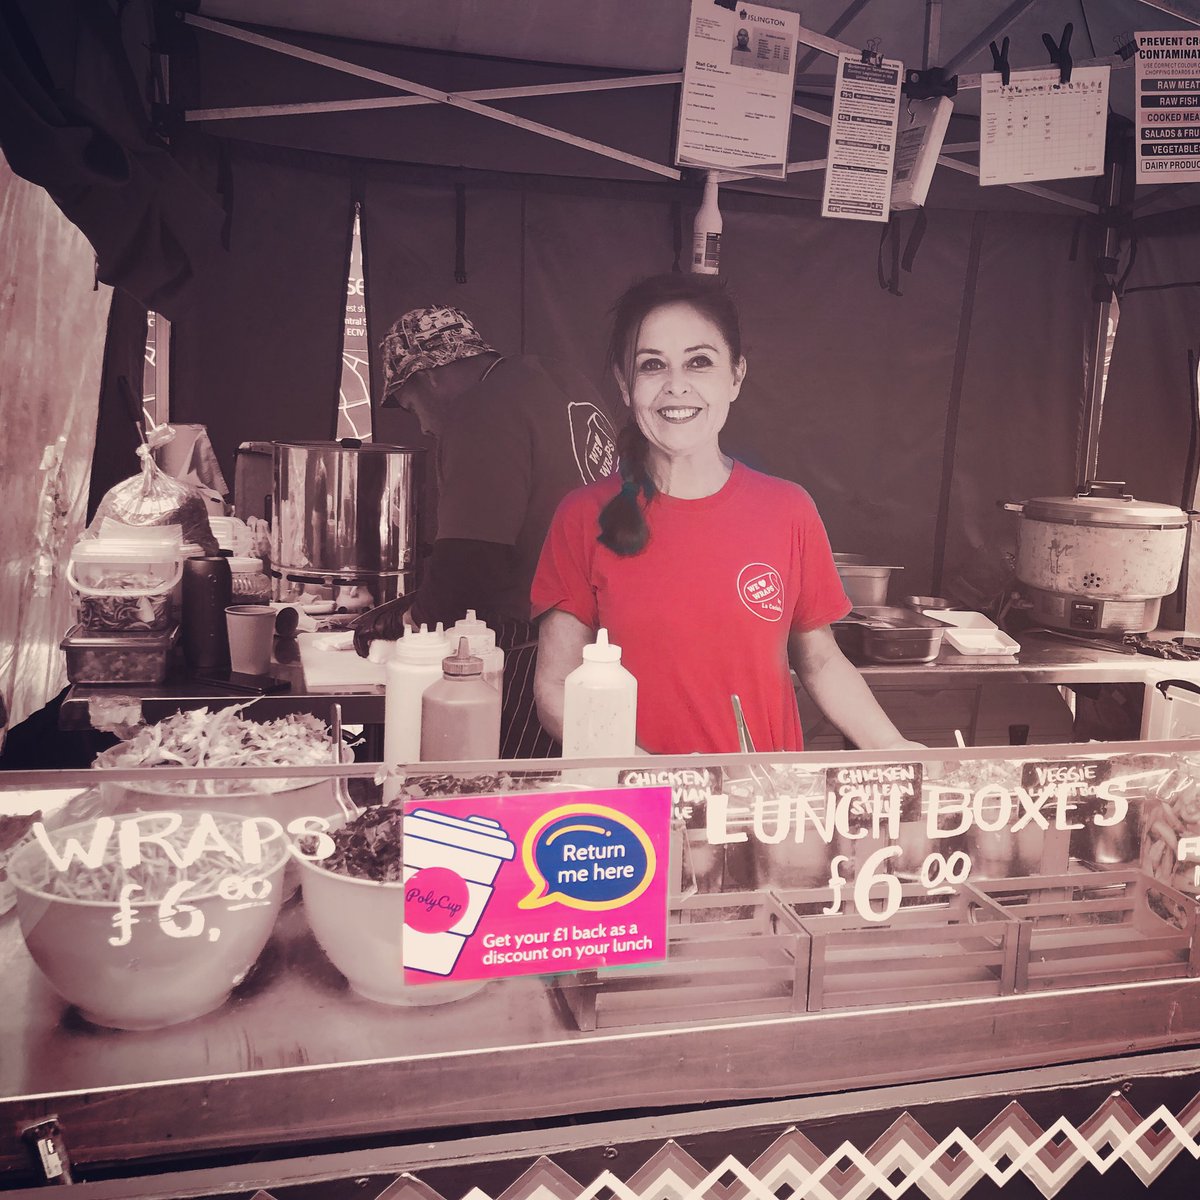 Swap Cups for Wraps at @CocinitaStFood 

Return your PolyCup at #exmouthmarket food stalls and get your £1 deposit back as a discount on your lunch!

#choosetoreuse 
#TuesdayThoughts 
#TuesdayMotivation